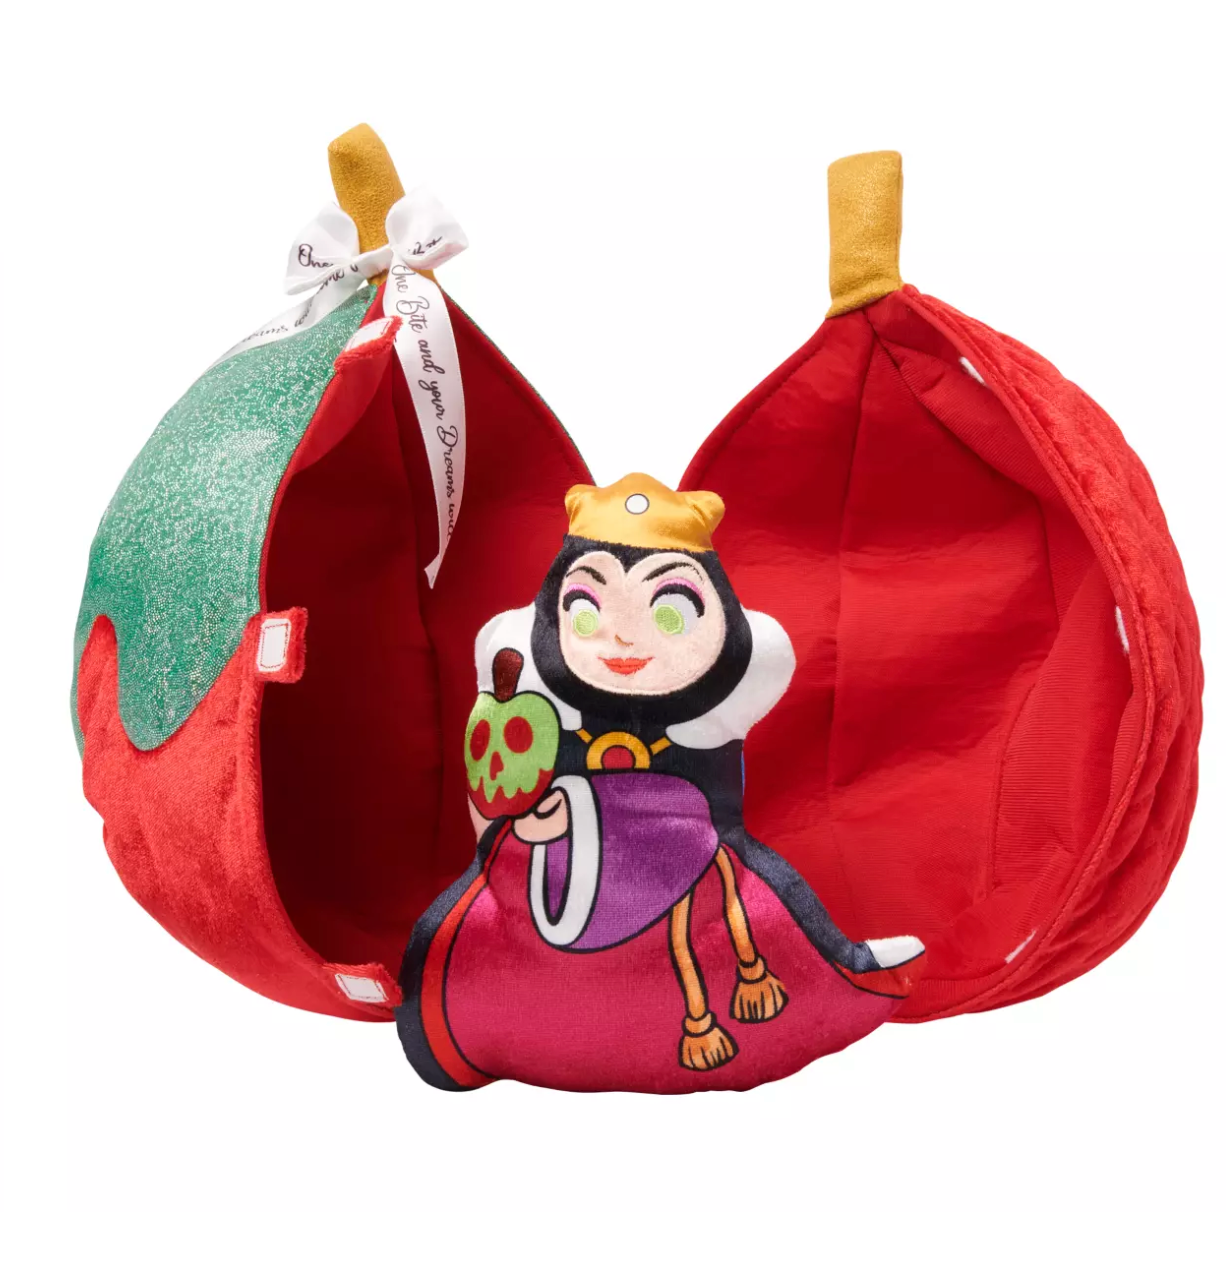 Disney Snow White and Evil Queen Plush in Poisoned Apple Plush New with Tag